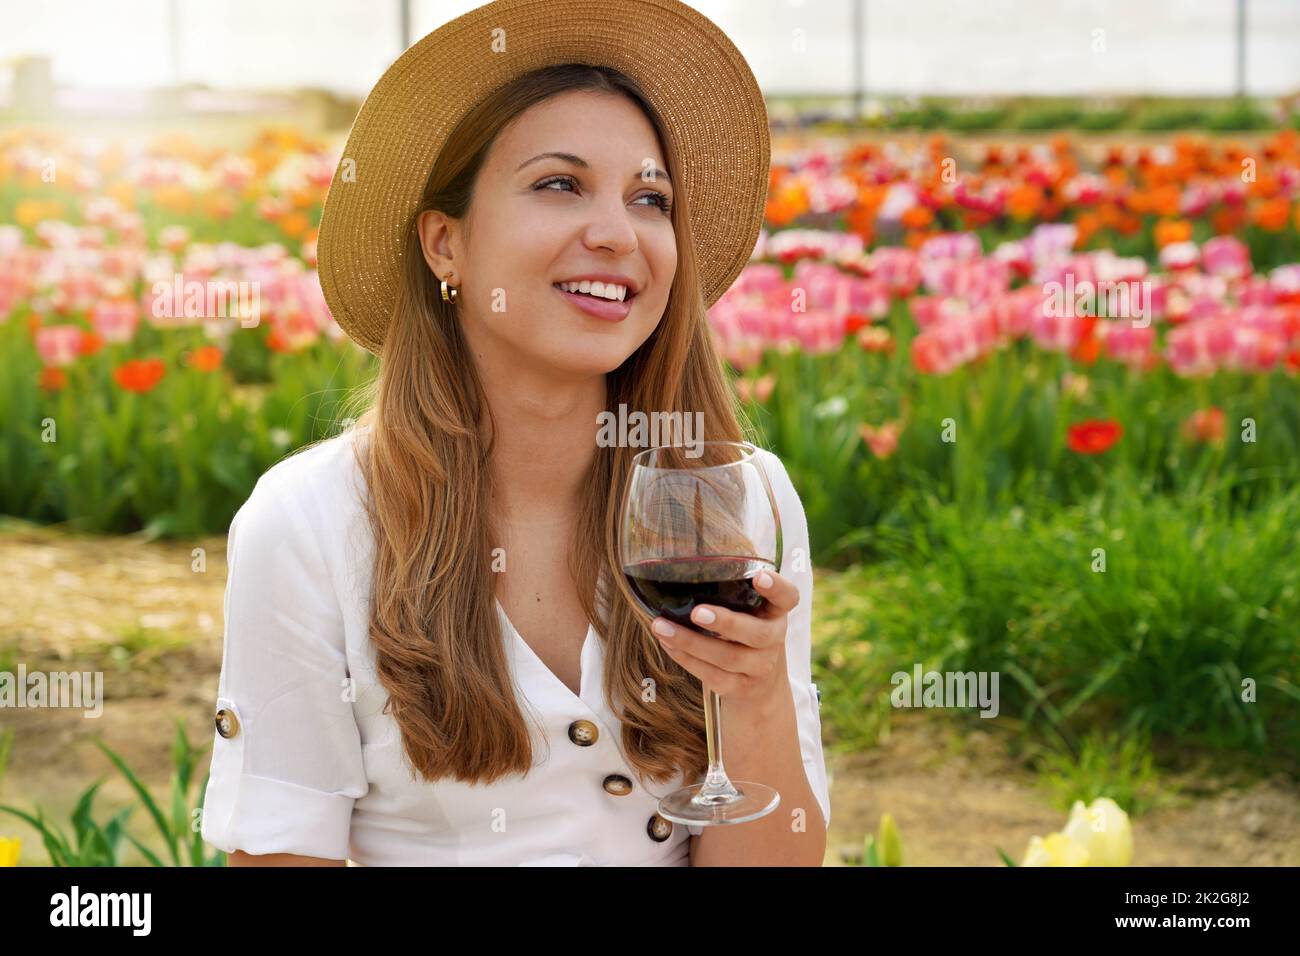 Young beautiful woman with straw hat drinking glass of red wine over flowered background looking to the side with happy face smiling Stock Photo